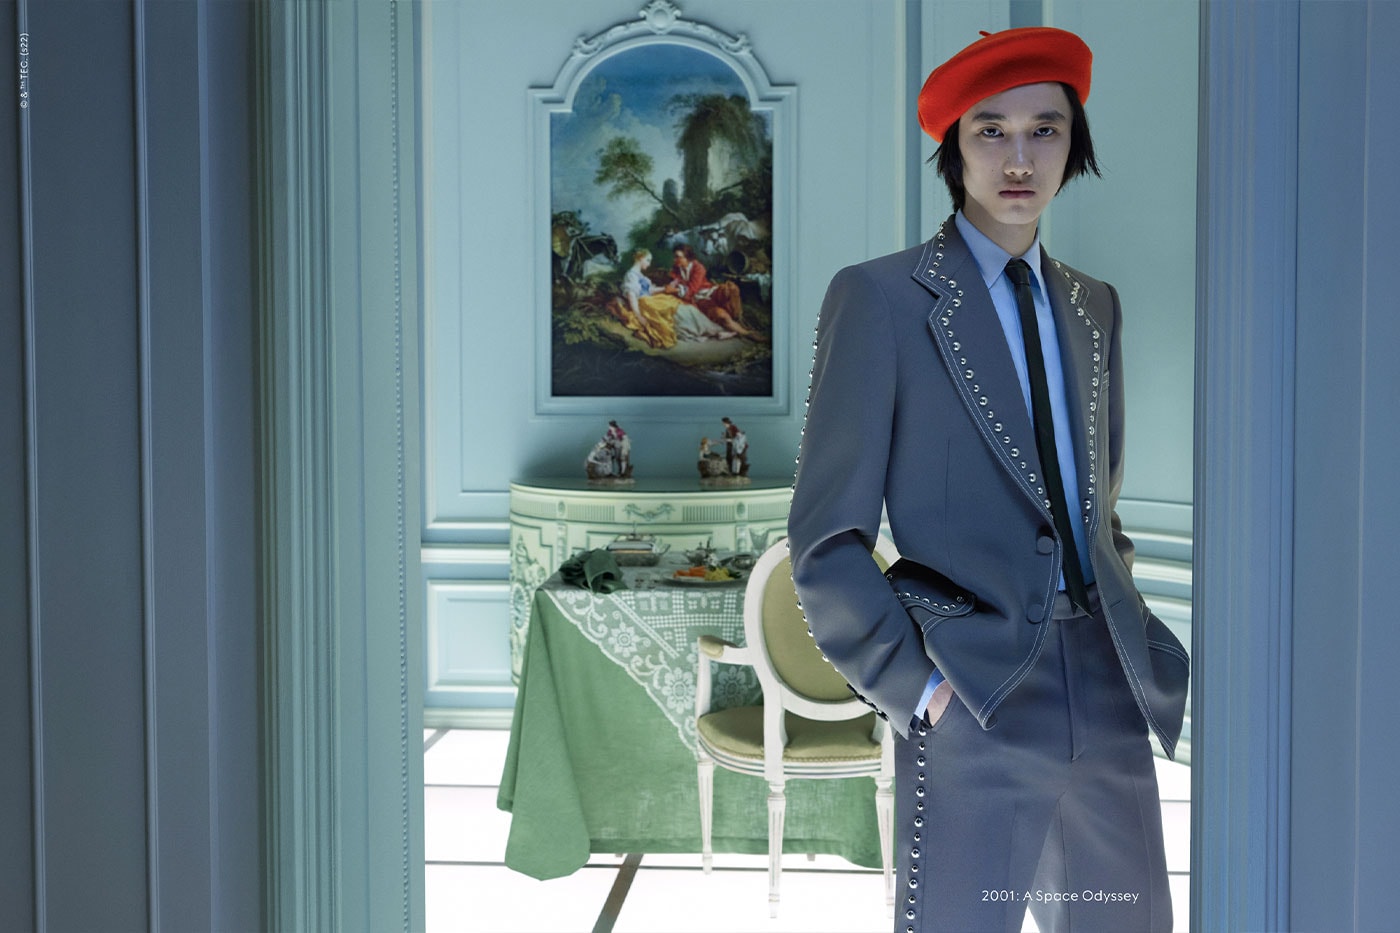 Gucci's Latest 'Exquisite' Campaign Recreates Scenes From Stanley Kubrick Films the shining a clockwork orange 2001: a space odyssey eyes wide shut